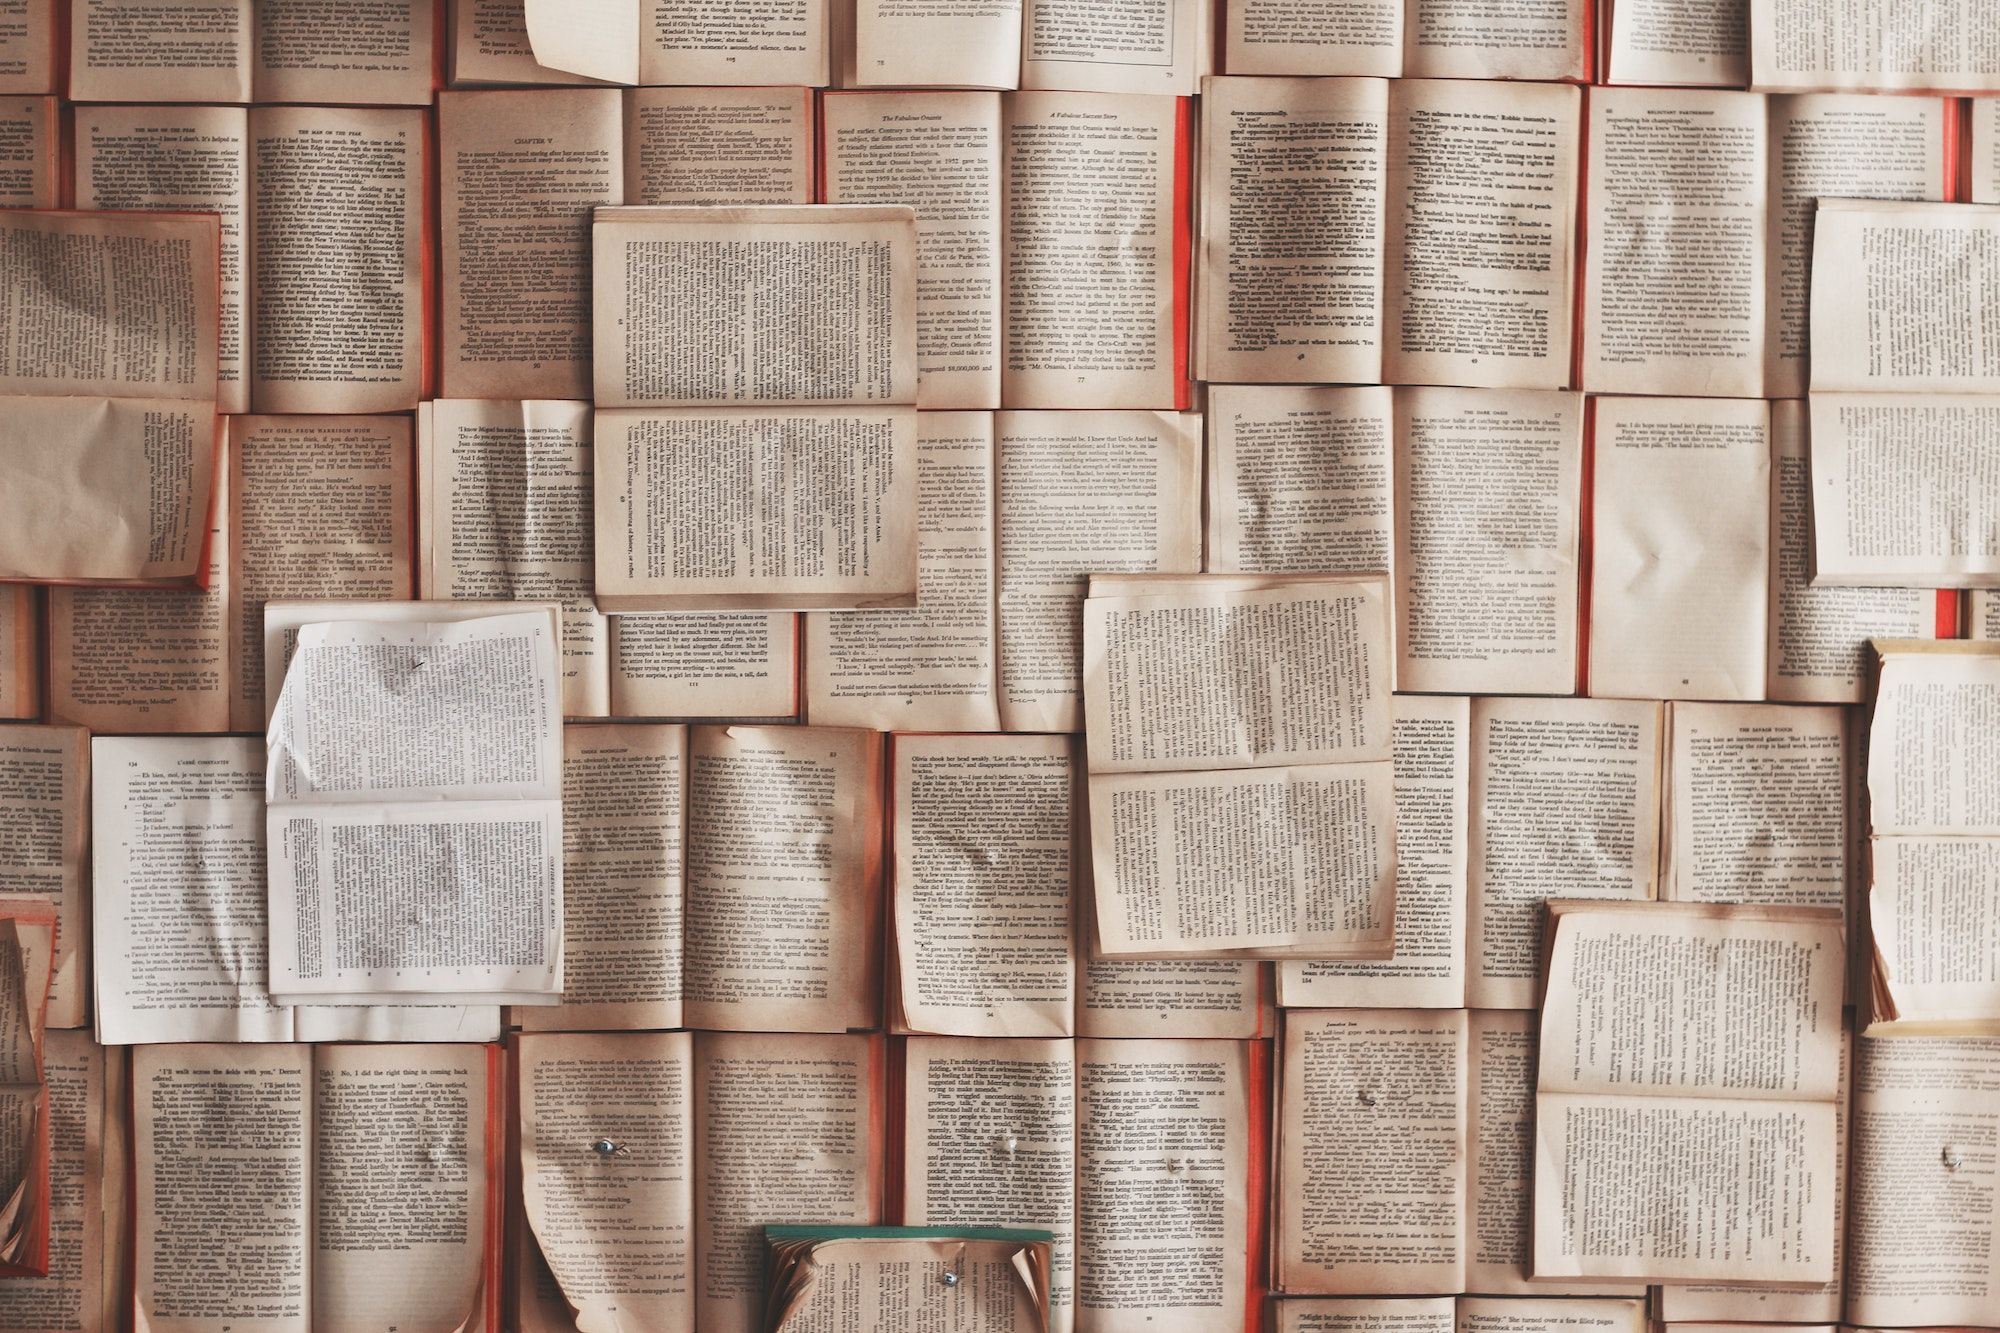 Stop reading self-help books: The incredible power of novels